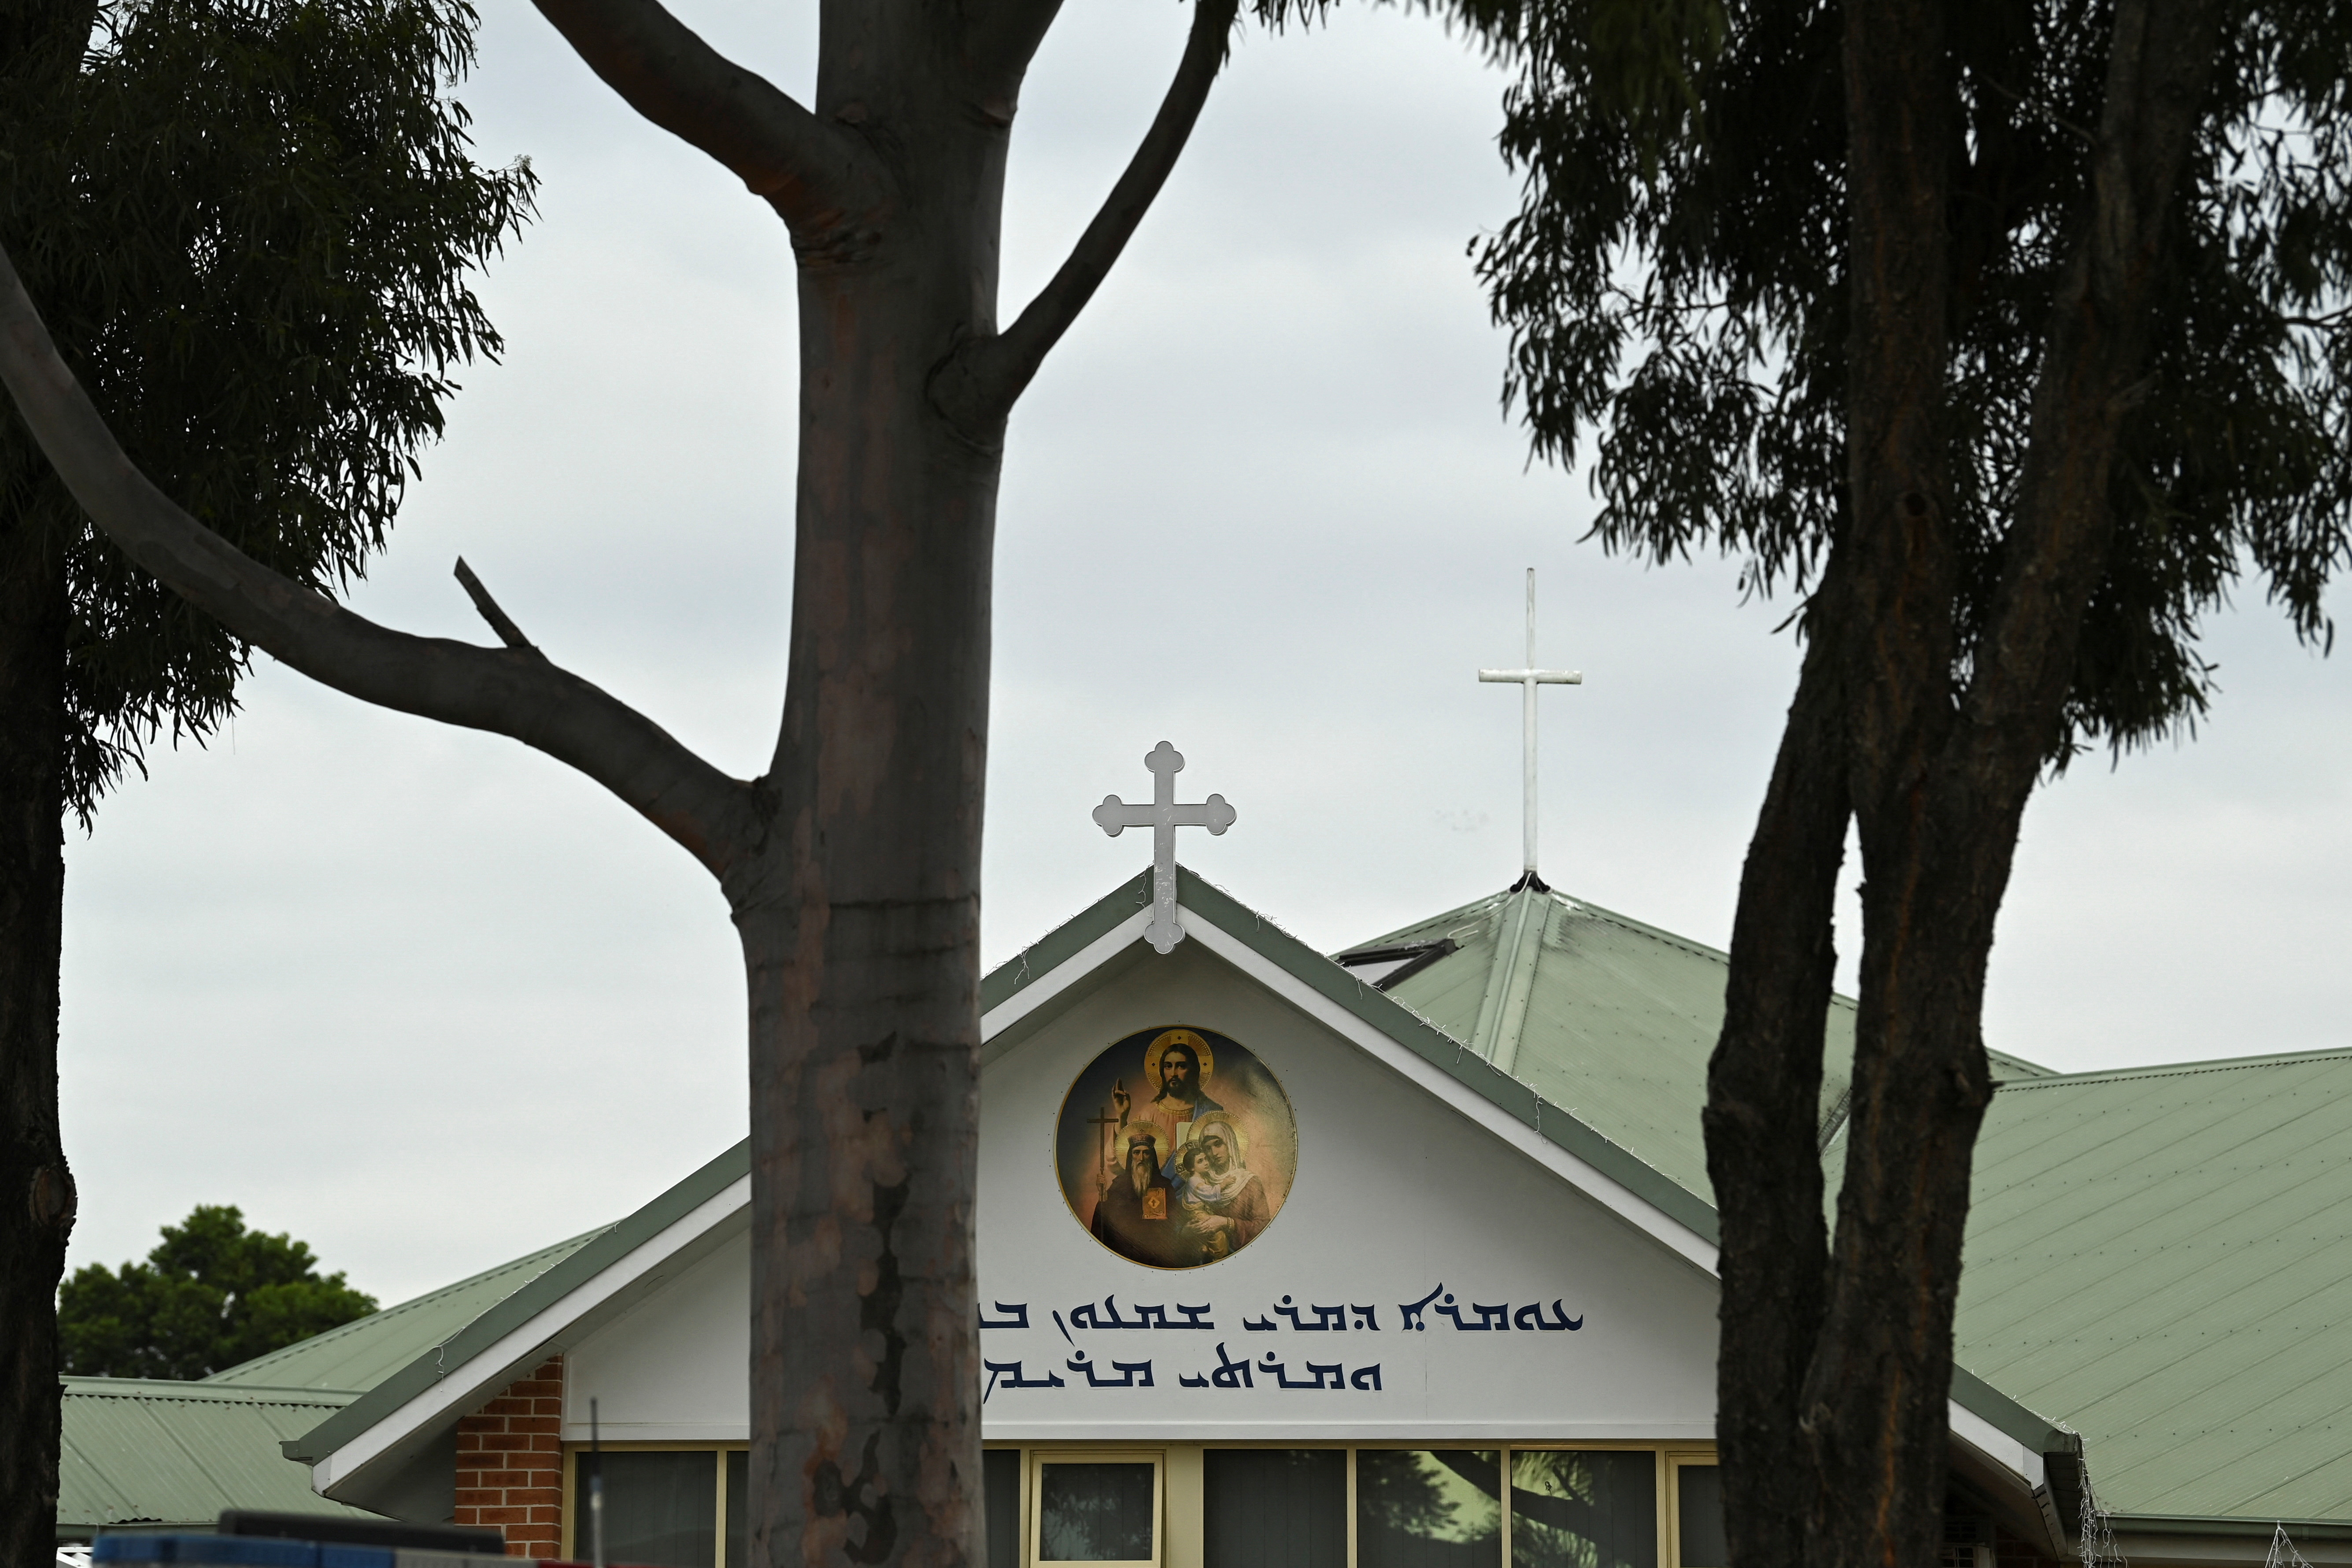 Aftermath of a knife attack at the Assyrian Christ The Good Shepherd Church, in Sydney qkxiqdxiqdeihrant